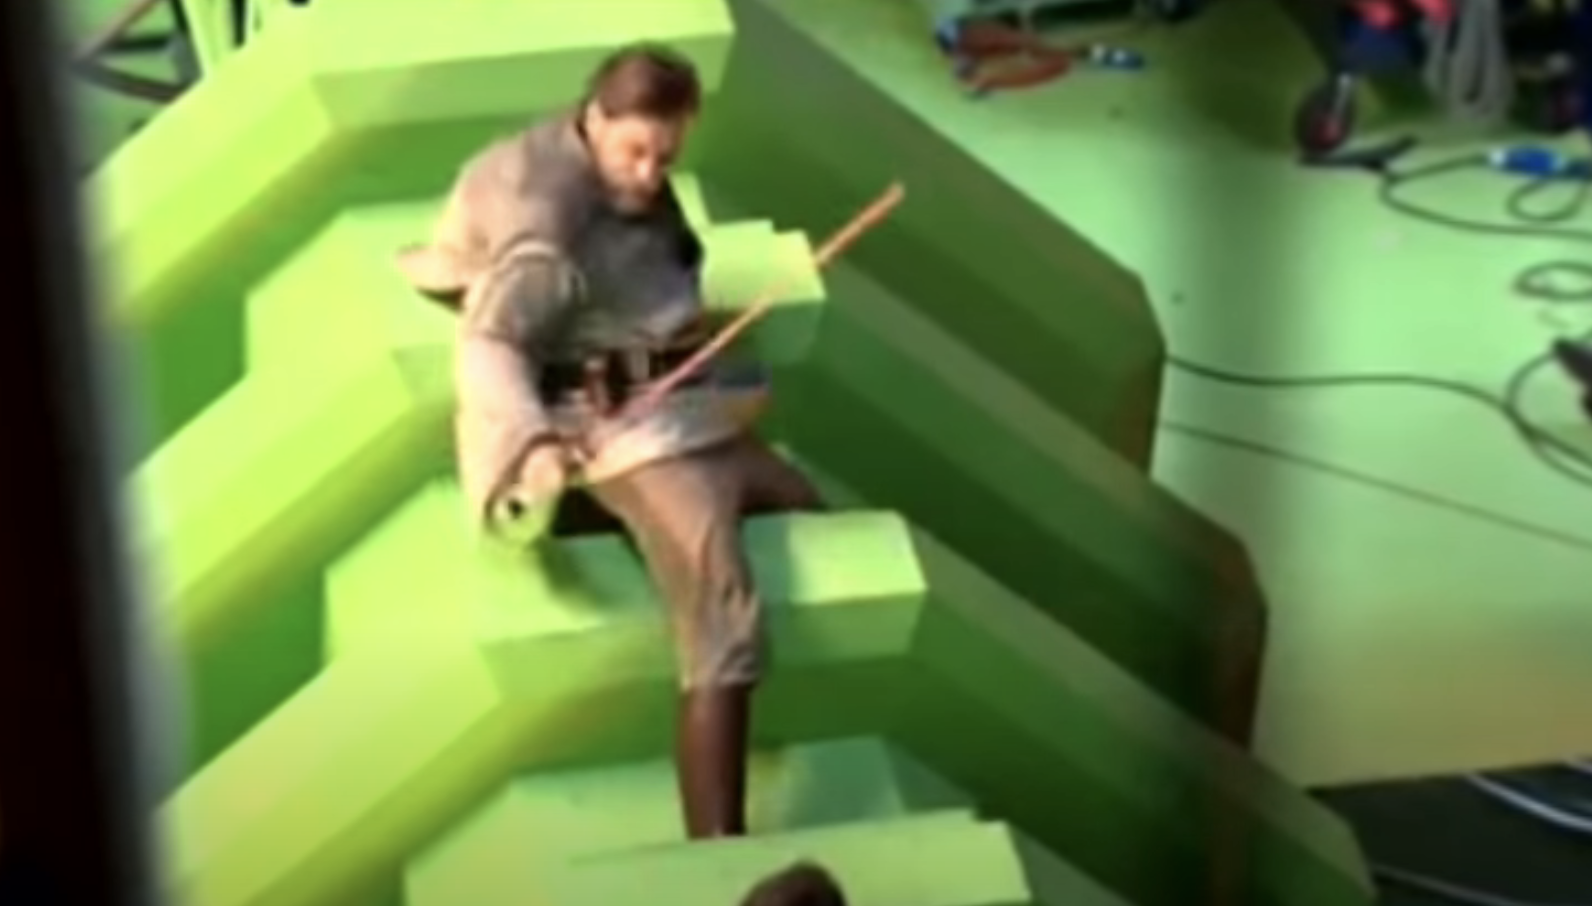 him climbing on green screen build-outs